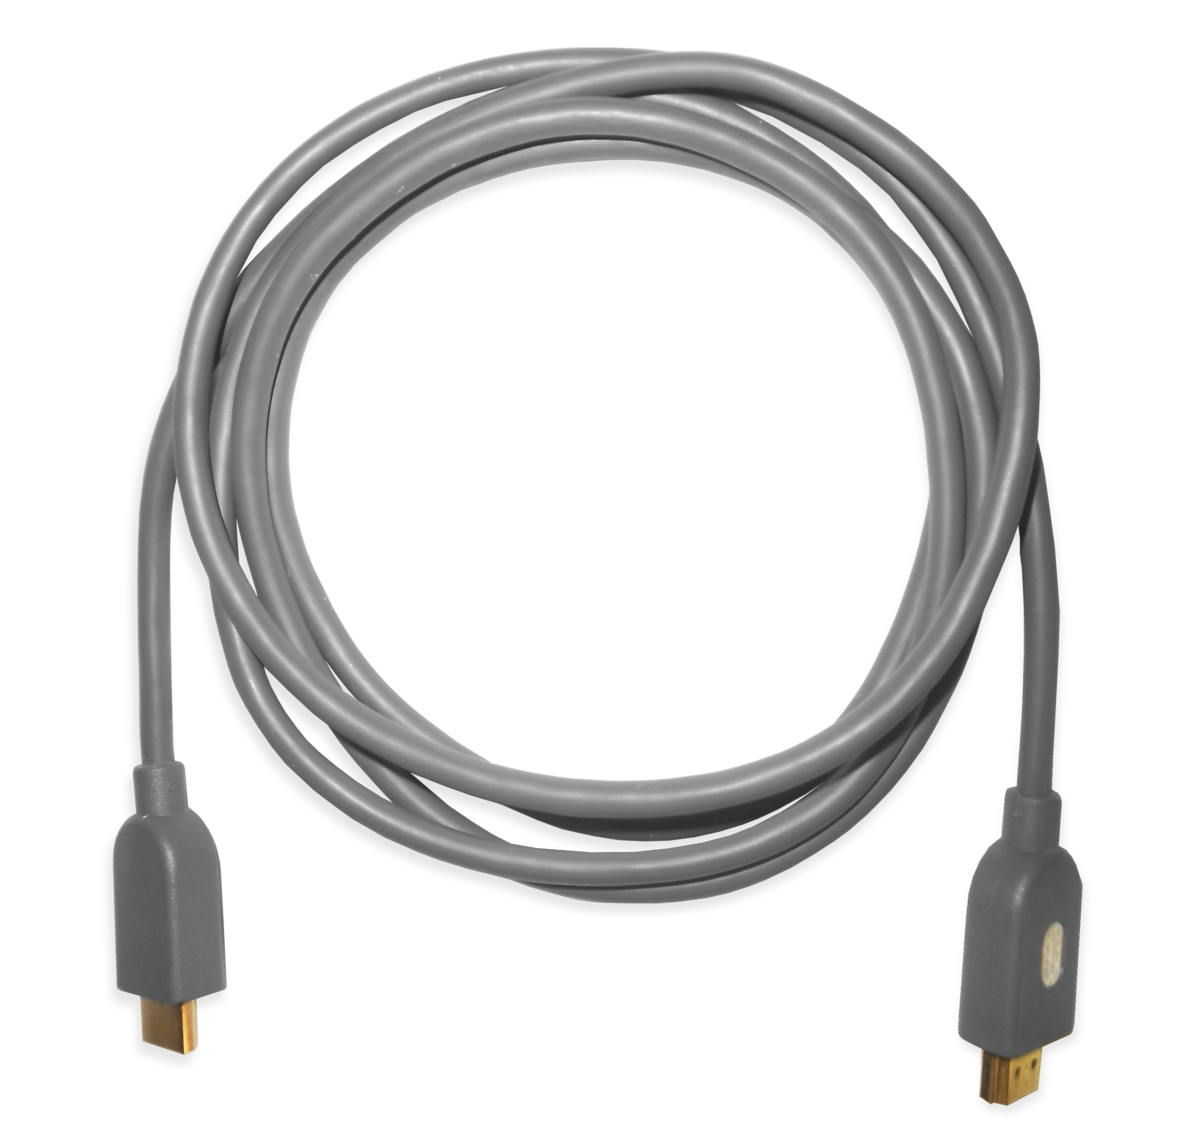 Long Hdmi Cable Download Free PNG